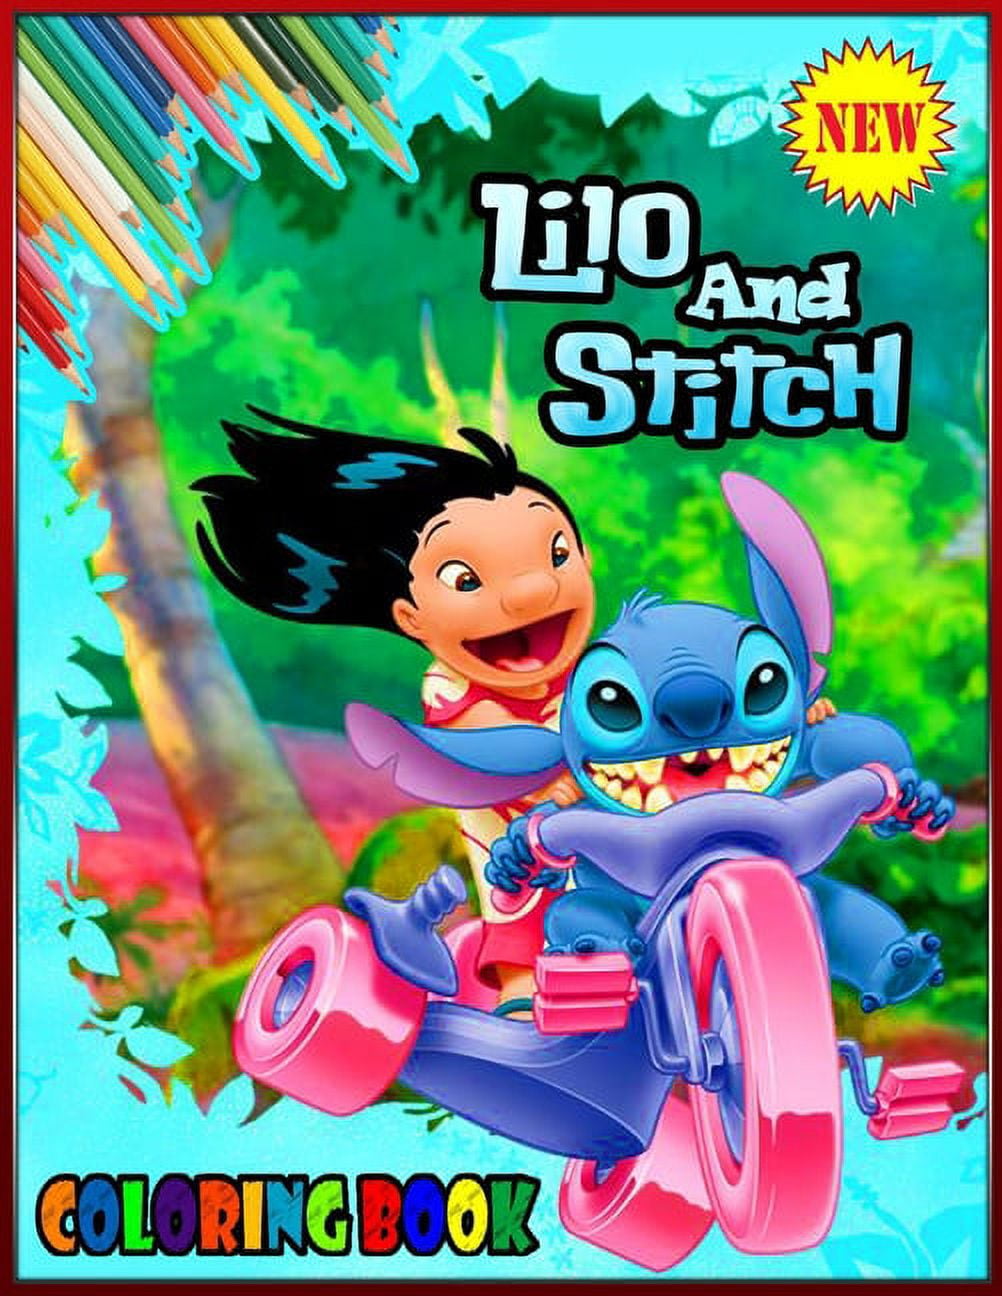 Lilo and stitch coloring book a lovely lilo and stitch coloring book about the popular lilo and stitch ohana for kids and adults to have fun and relax x size paperback